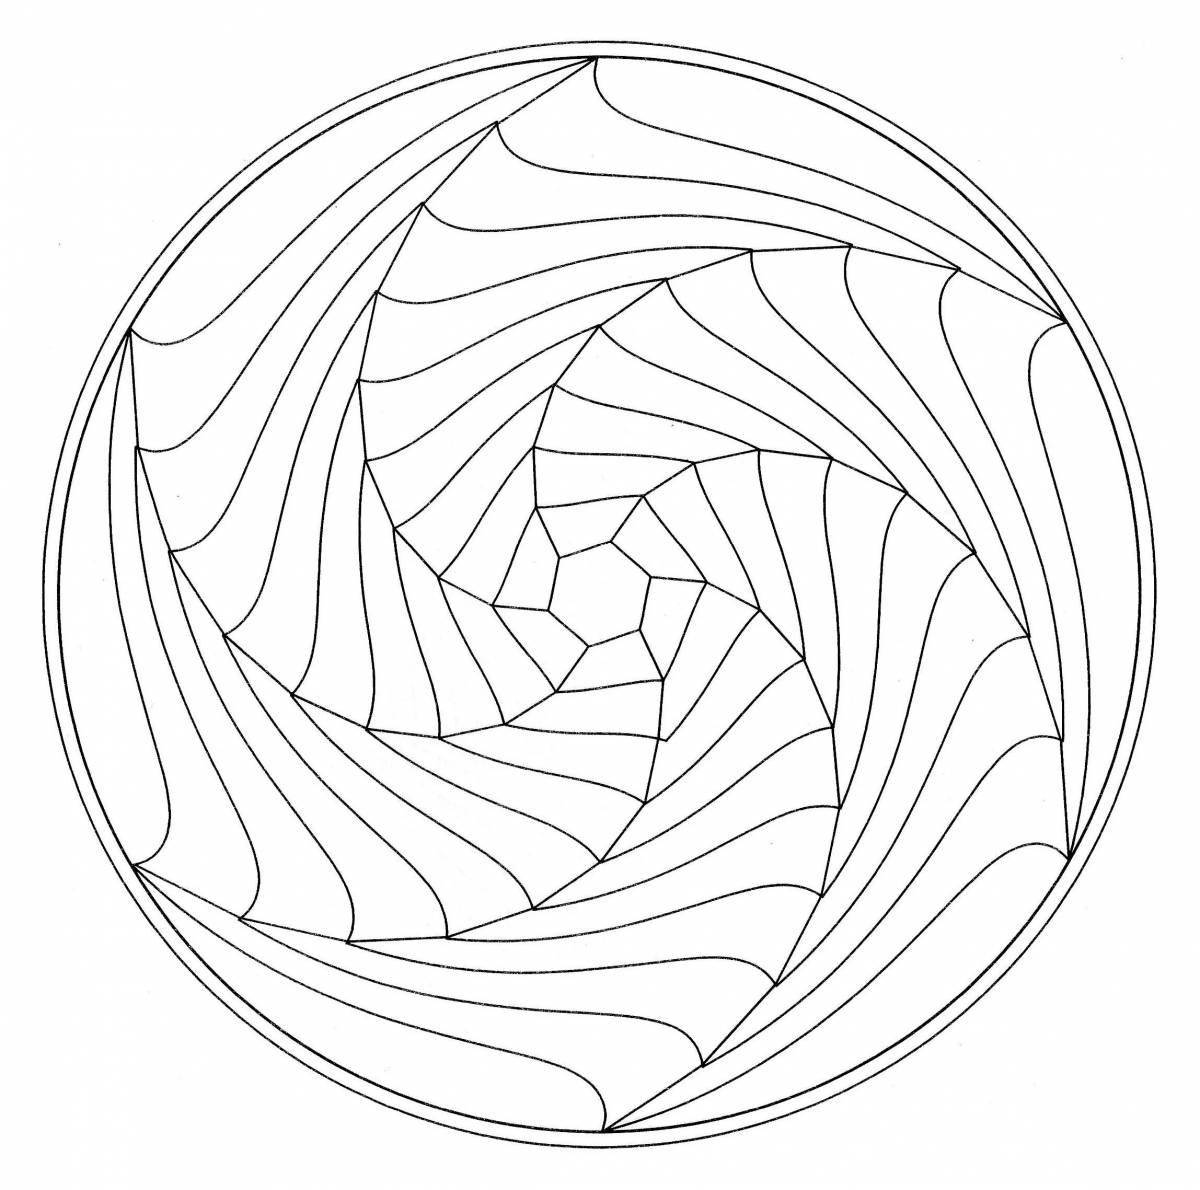 Exotic spiral coloring page